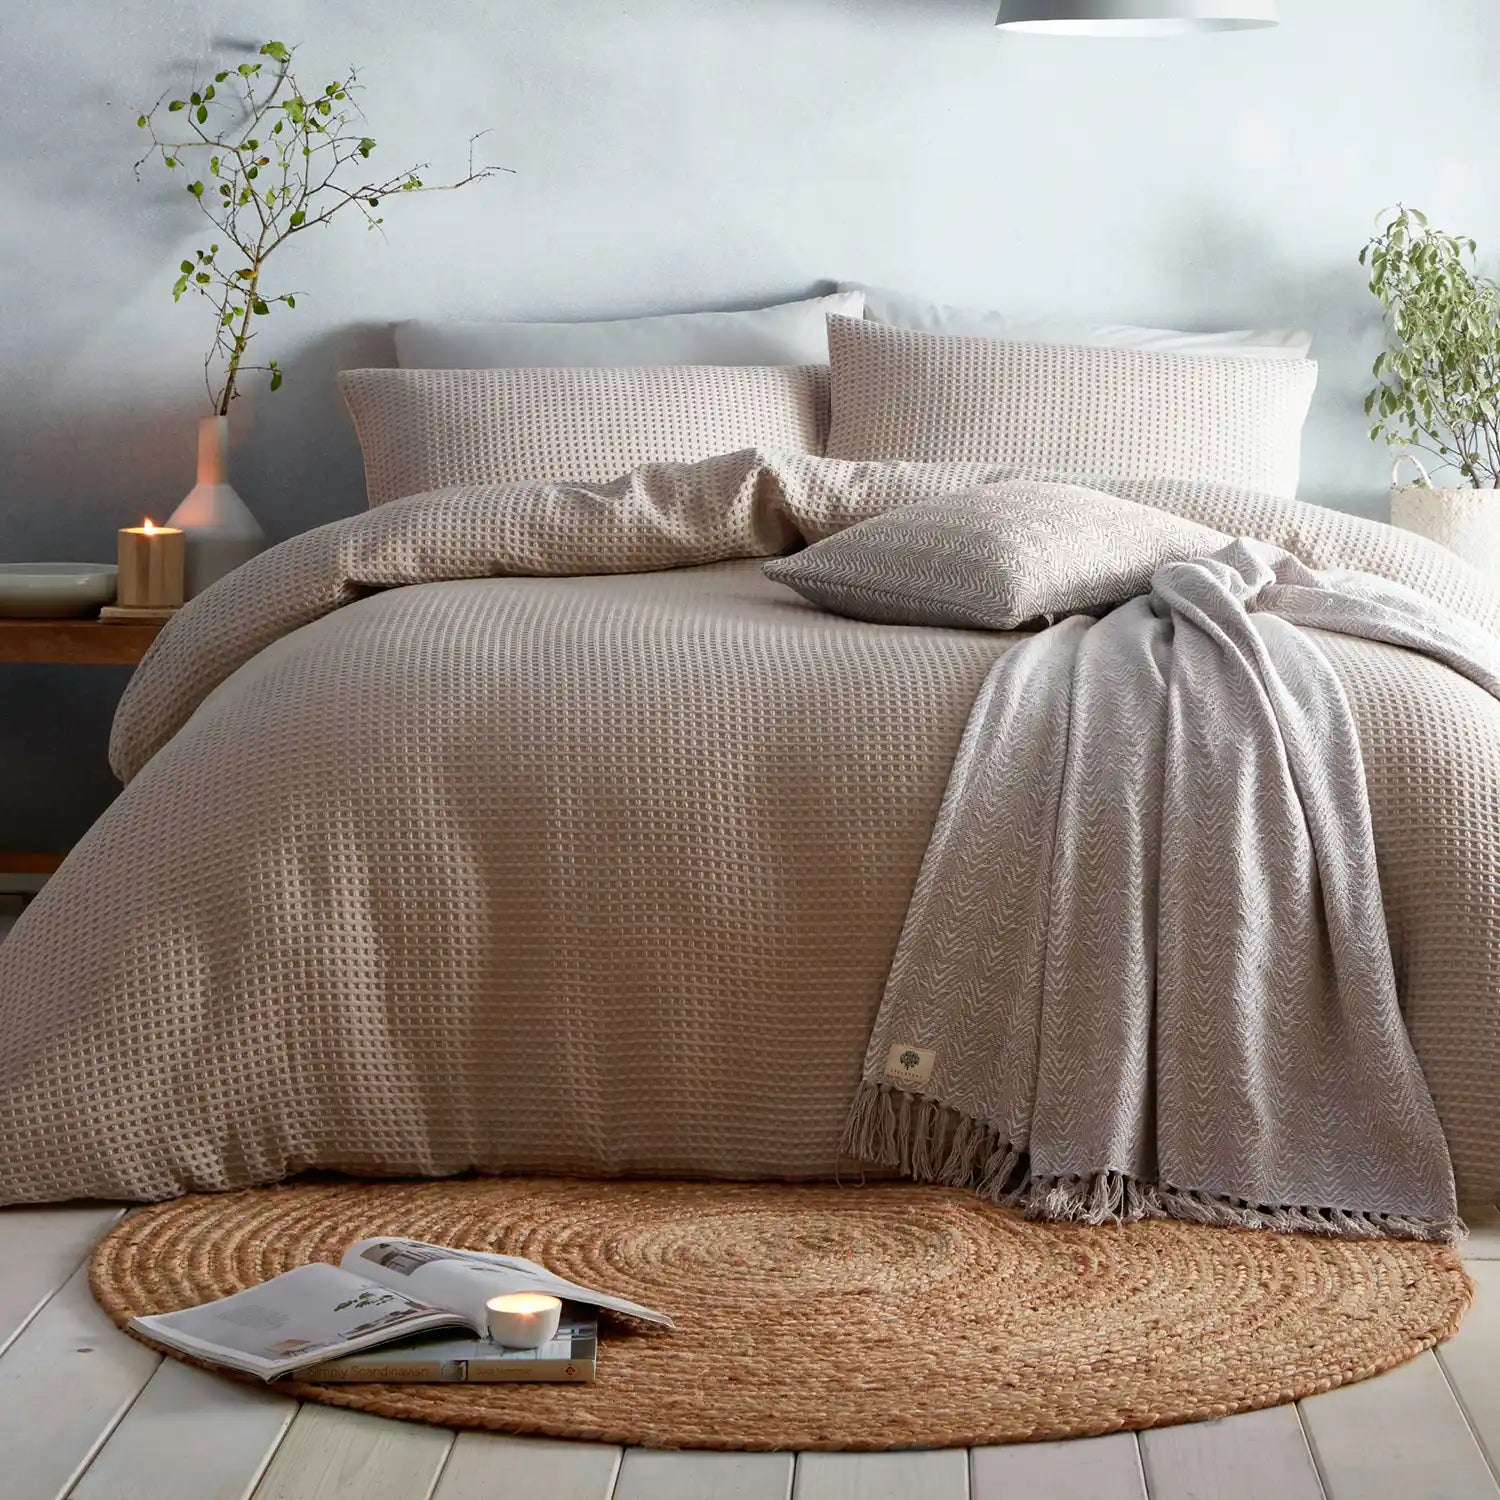  The Home Luxury Collection Textured Waffle Duvet Cover Set 1 Shaws Department Stores